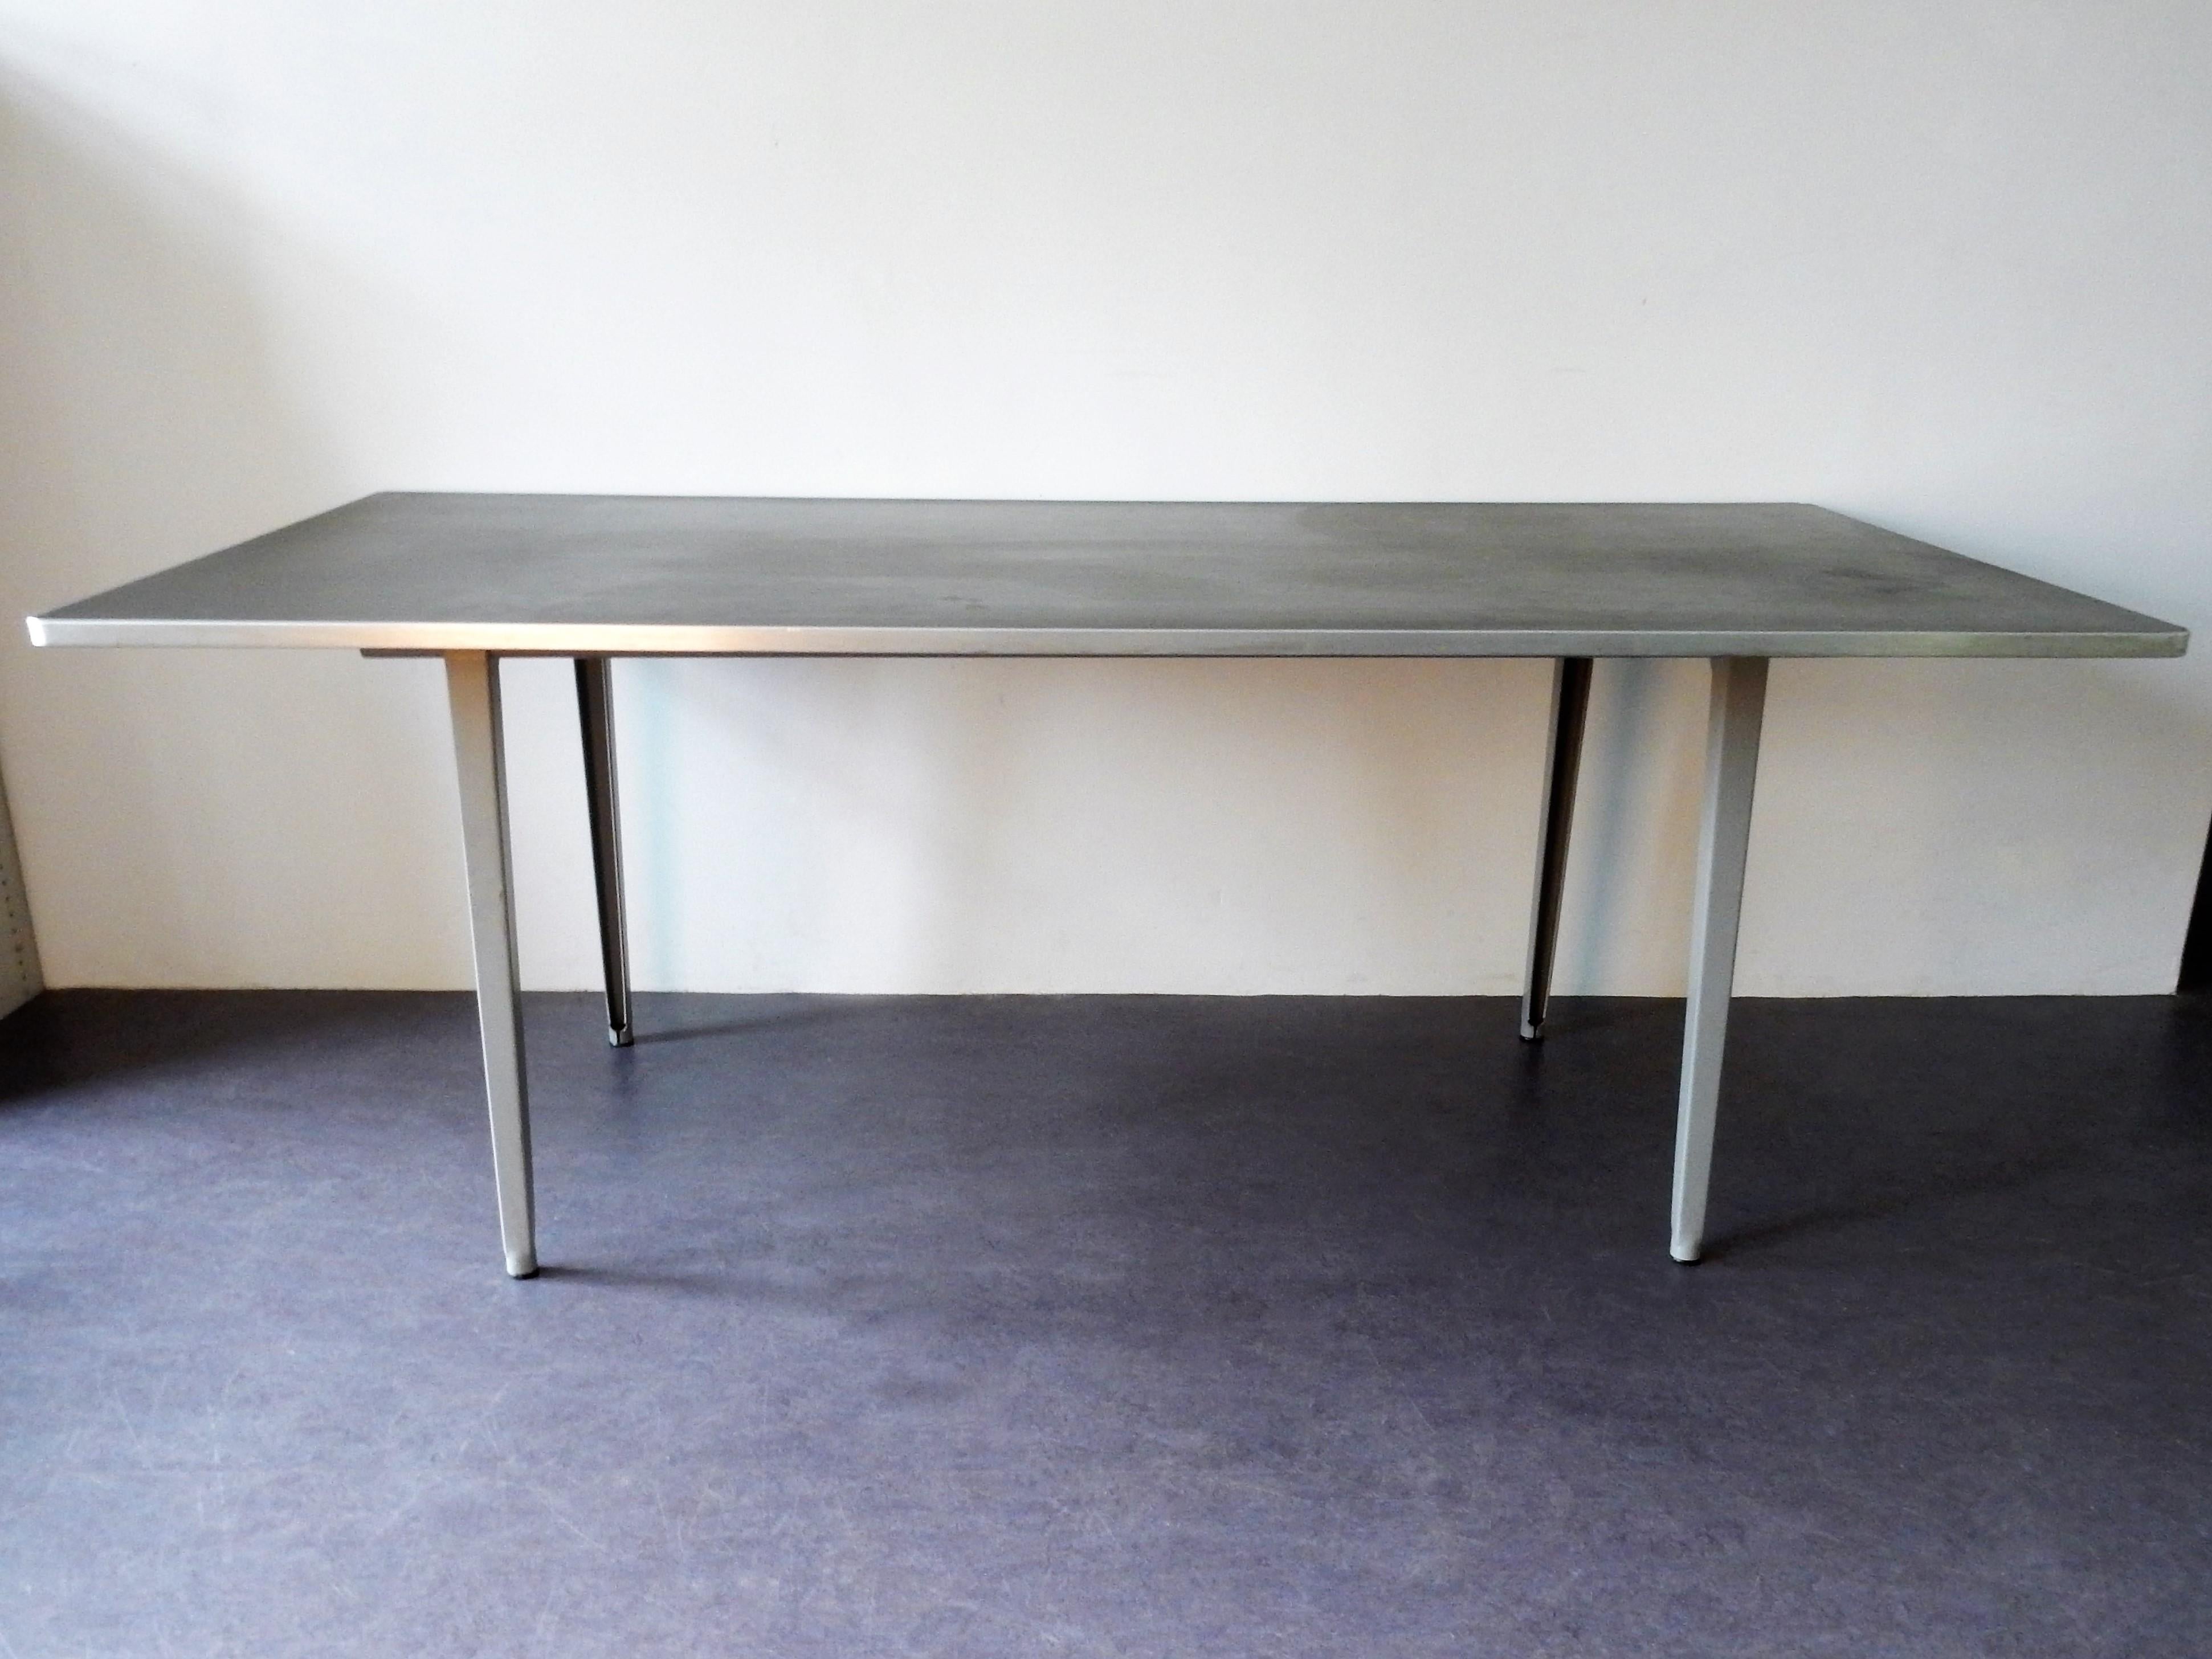 The famous 'Reform' table was designed by Friso Kramer for Ahrend de Cirkel in 1955. This table is a true Dutch design in a very nice condition. At the mark on the solid metal frame you can see it was specially made for delft University of